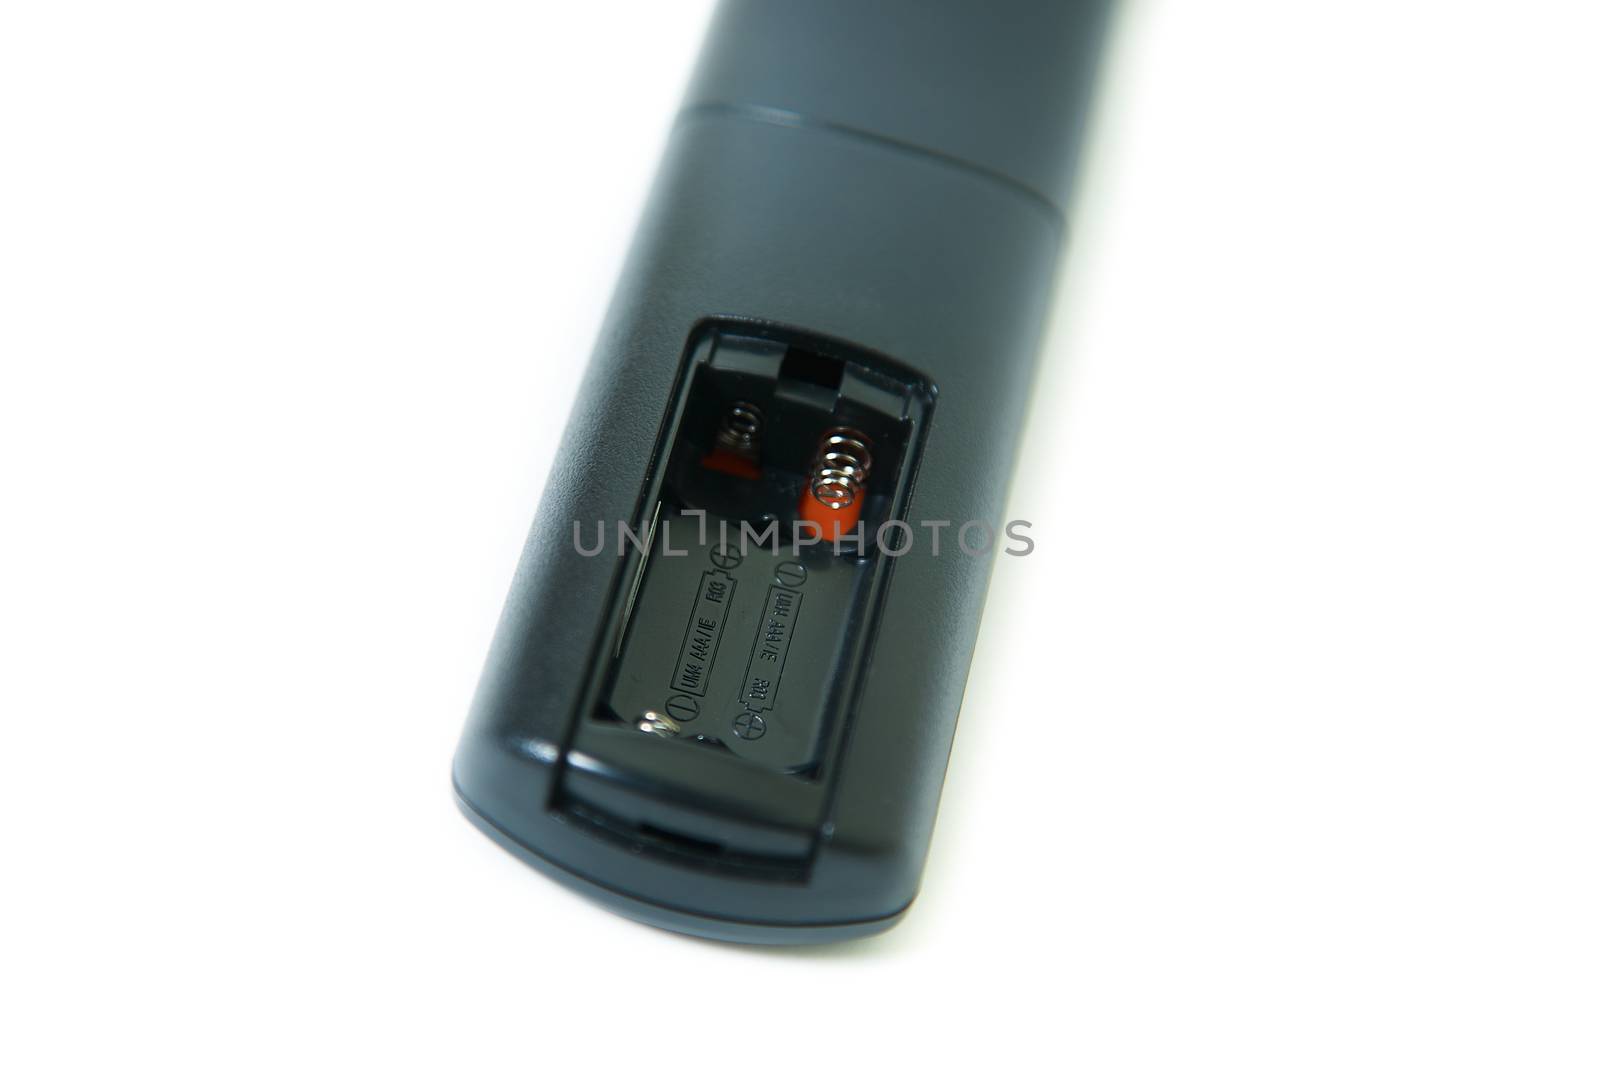 tv remote control on white background at the back battery section